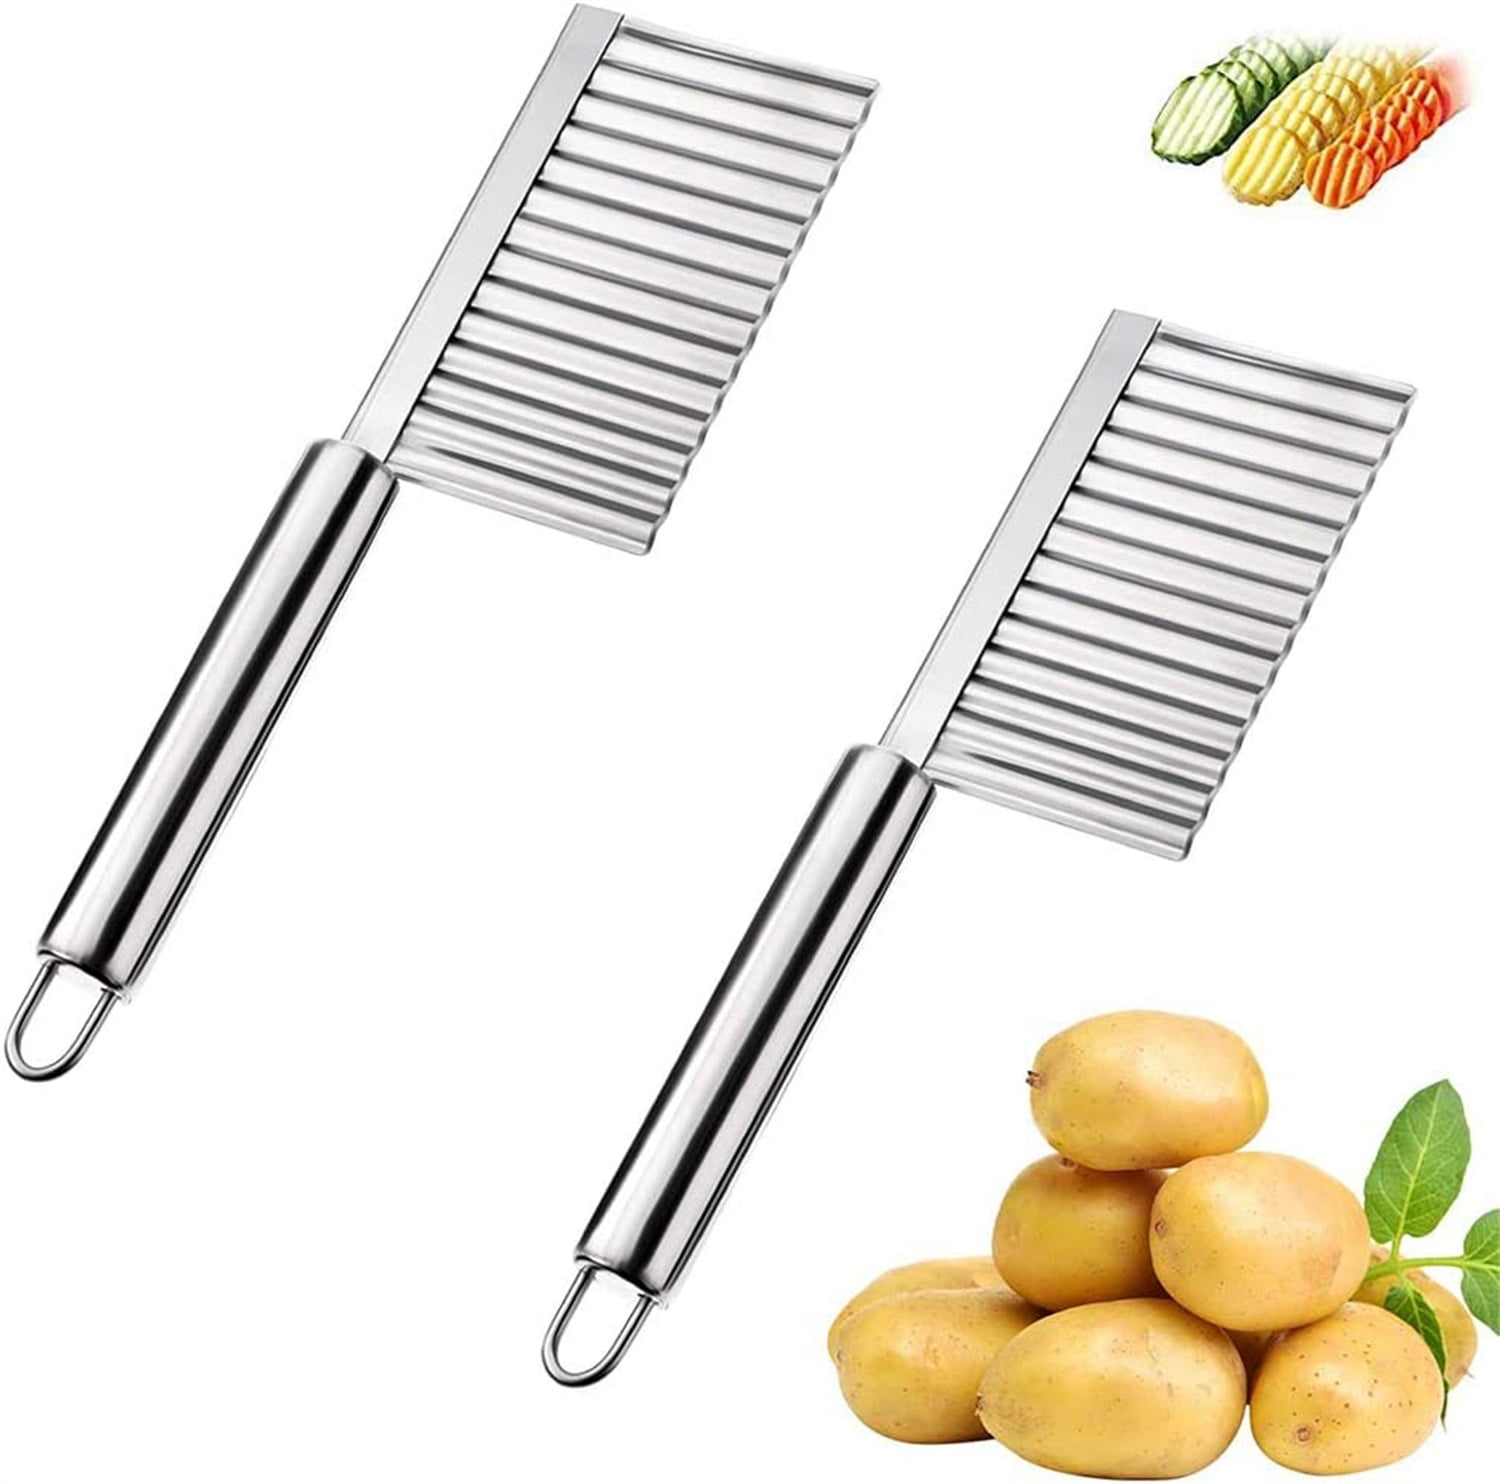 HTBMALL Crinkle Potato Cutter, Wavy Chopper Knife, Upgraded Stainless Steel  Blade, Safe Kitchen Tools with a shell Wavy Slicer for Fruit, Vegetable